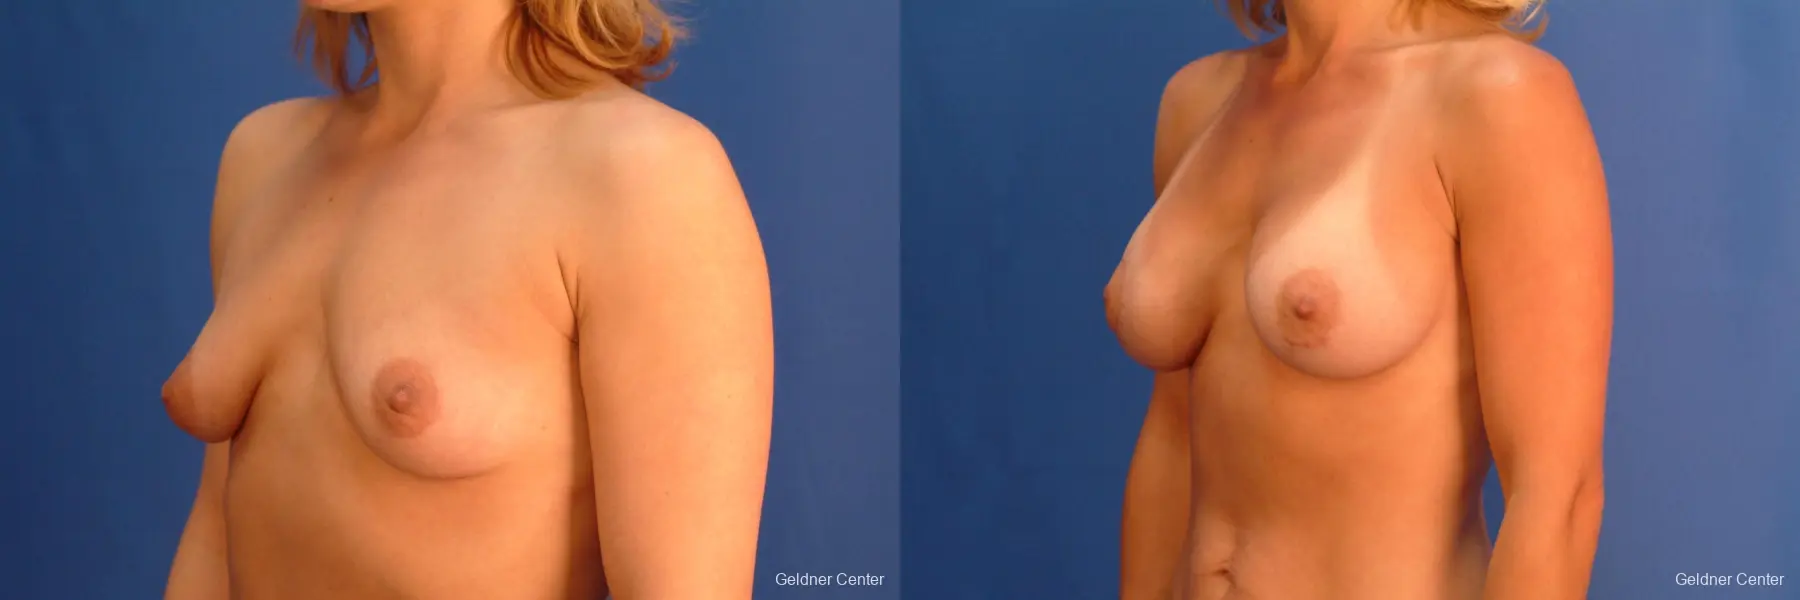 Breast Augmentation Lake Shore Dr, Chicago 2637 - Before and After 4